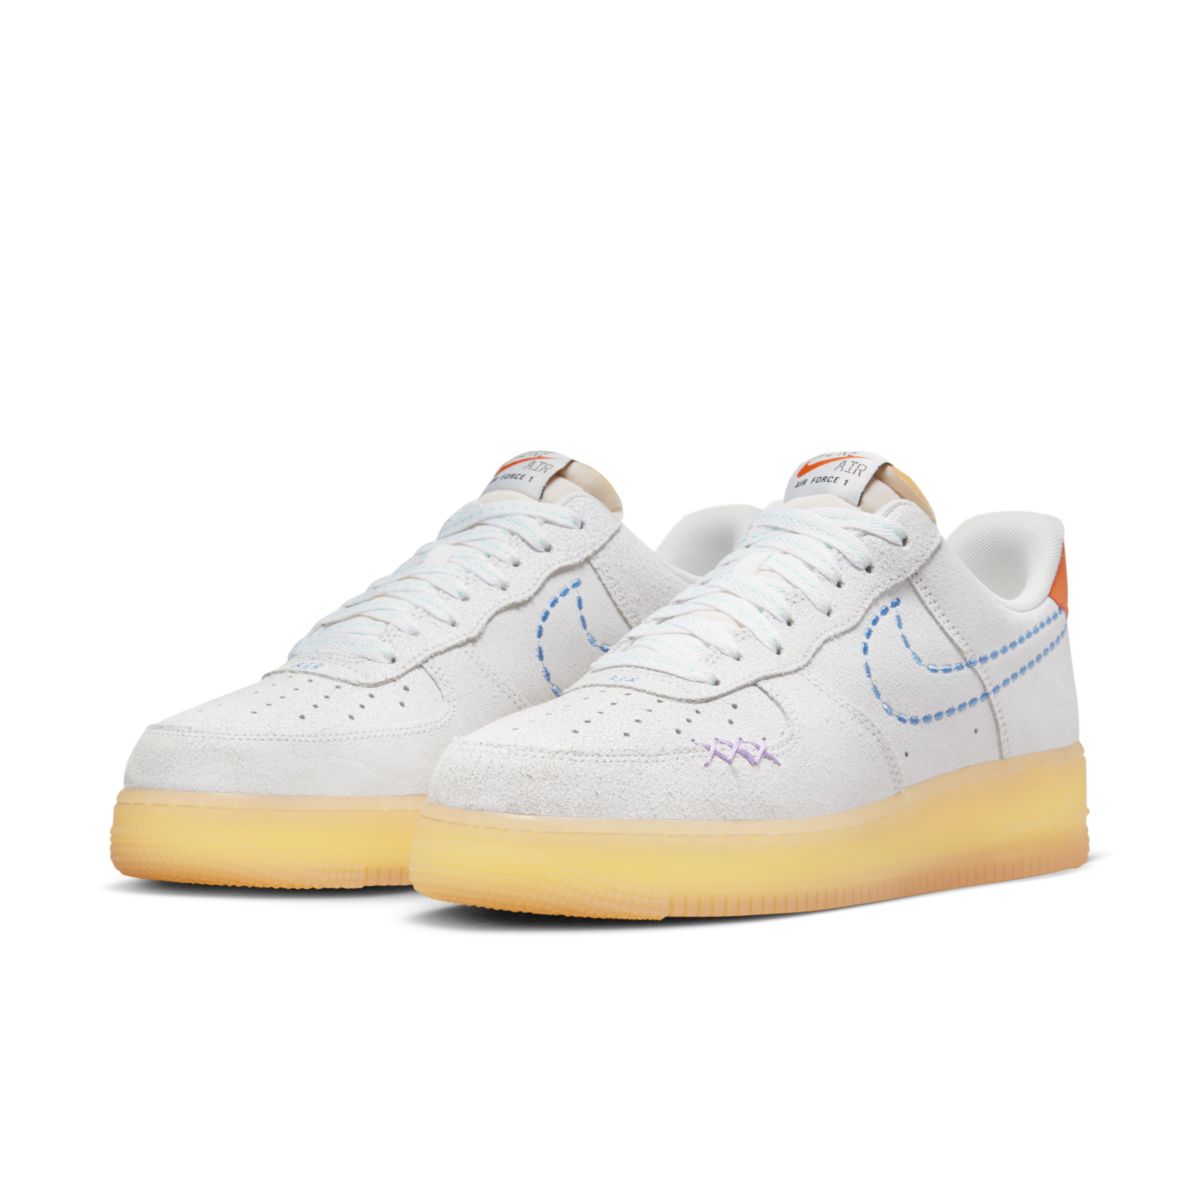 Nike Air Force 1 Low 101 DX2344-100 4